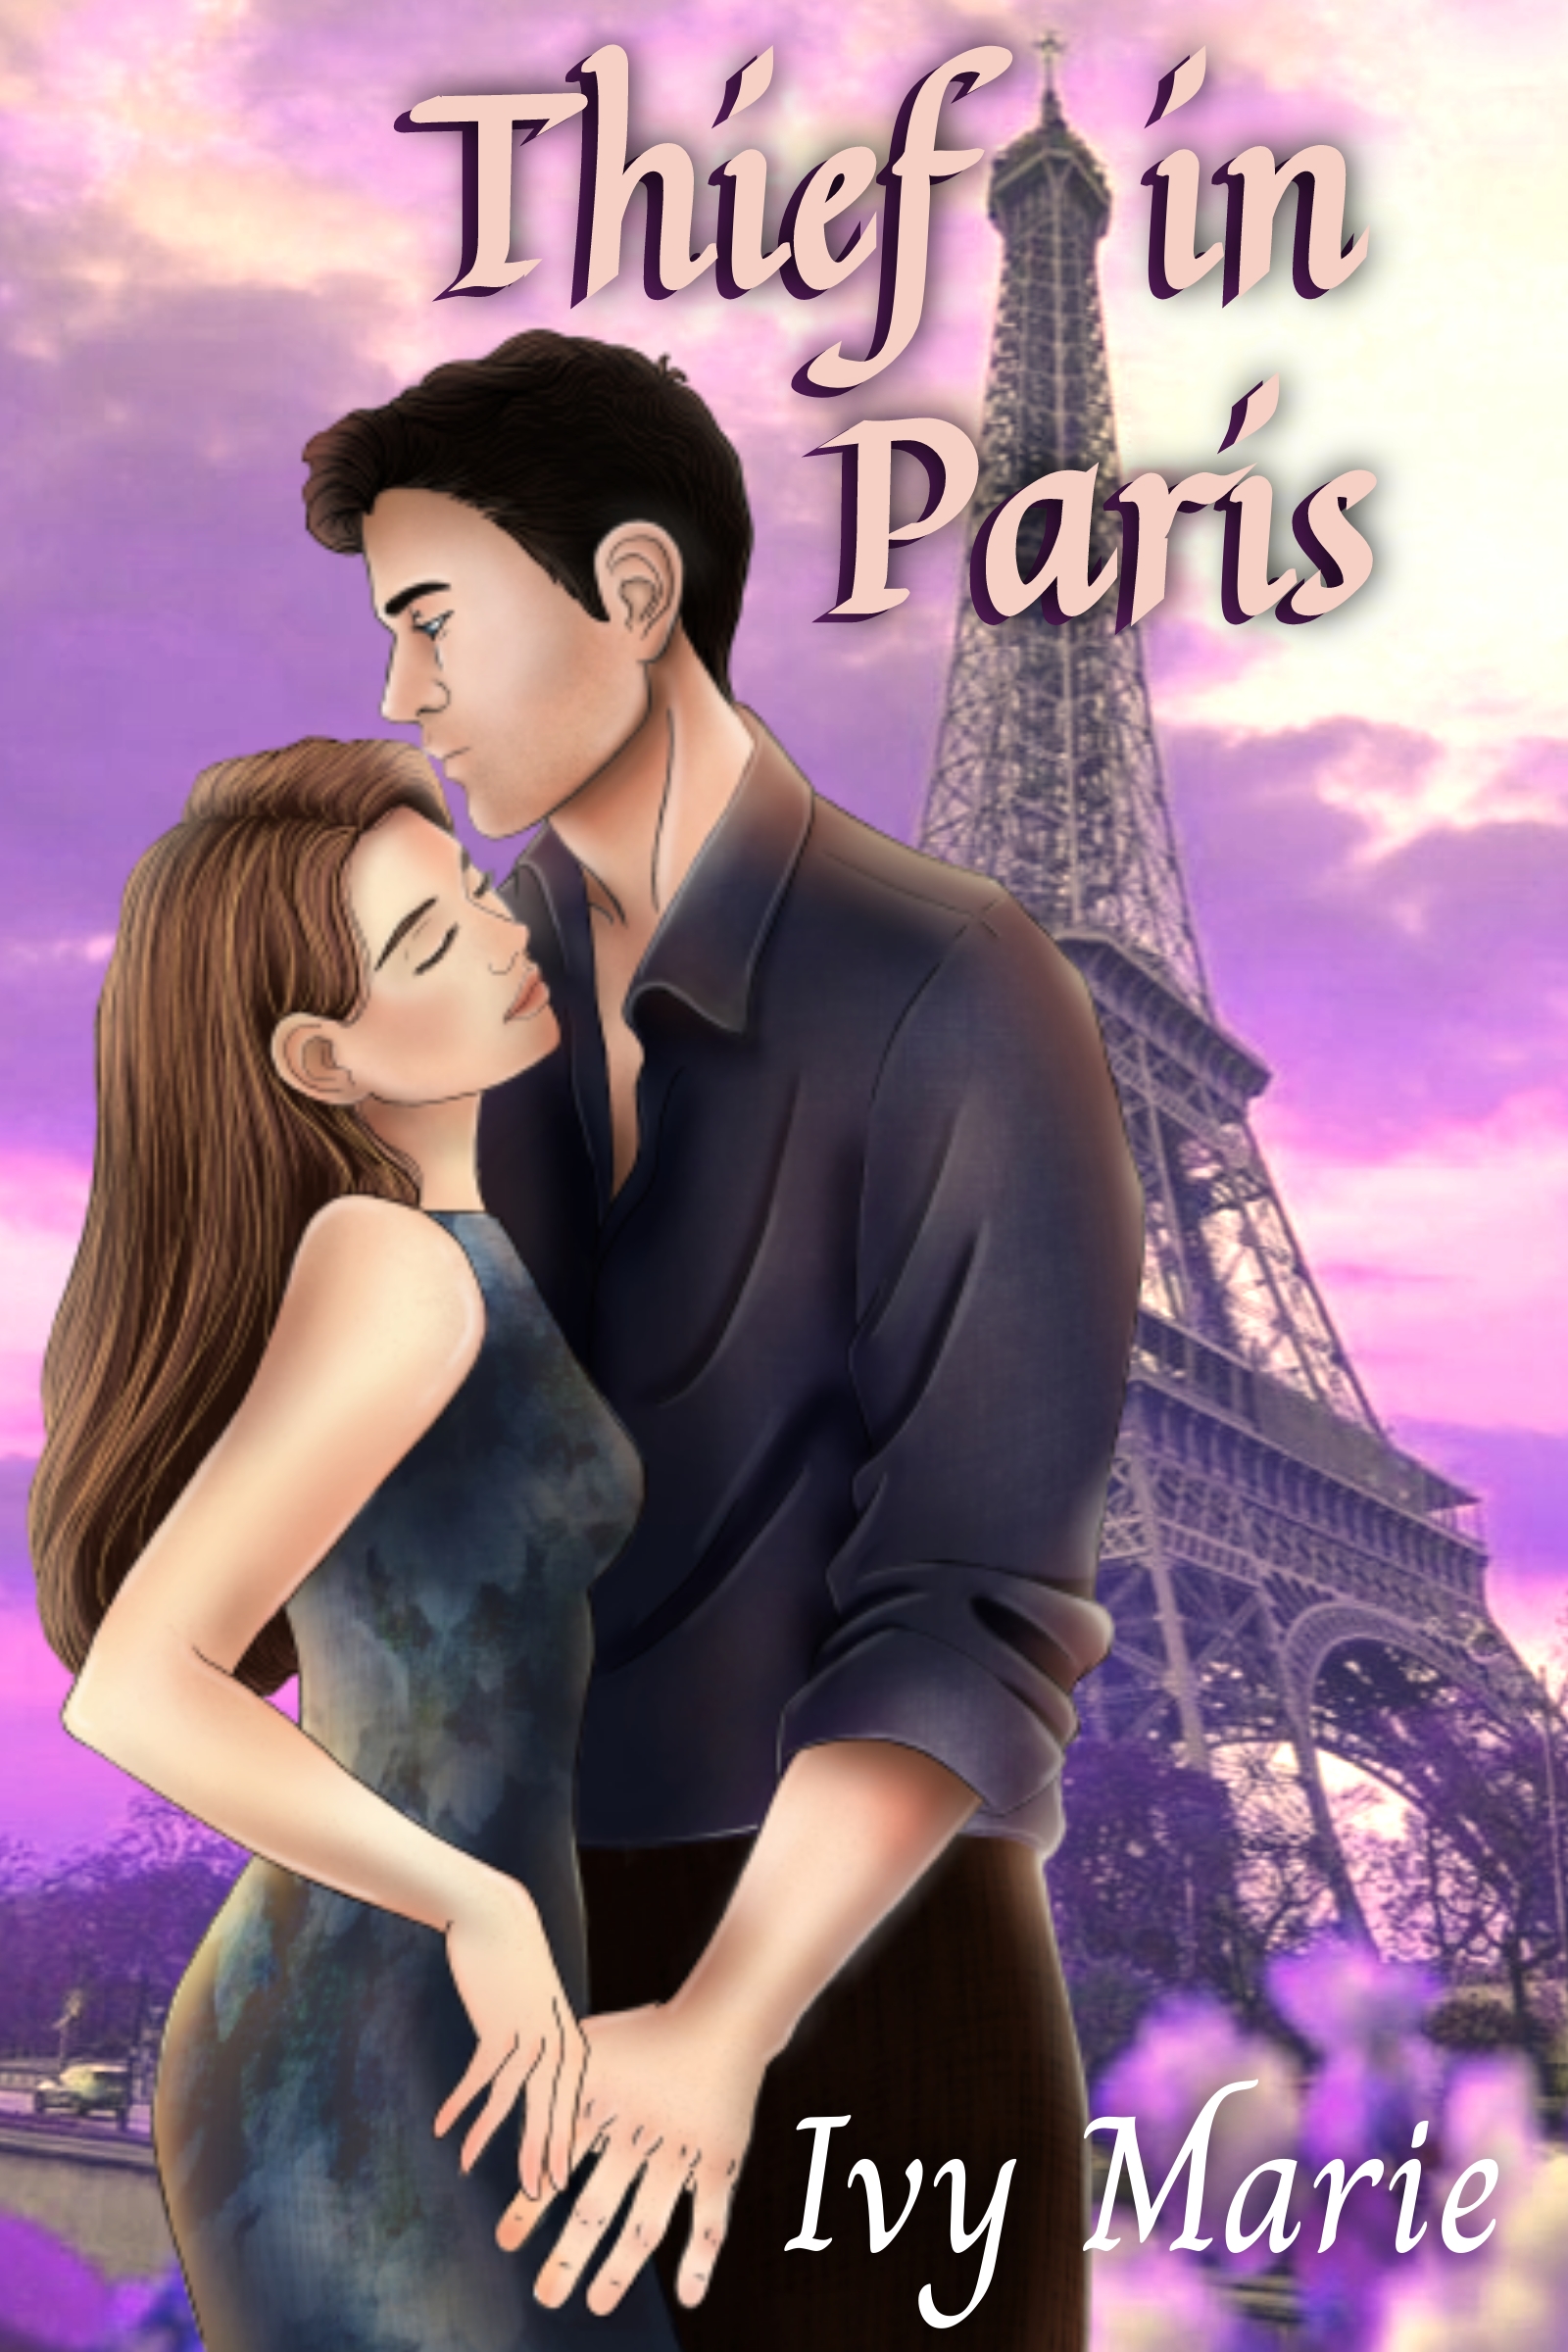 Male holding a woman's hand, leaning into each other, Eiffel tower in the background